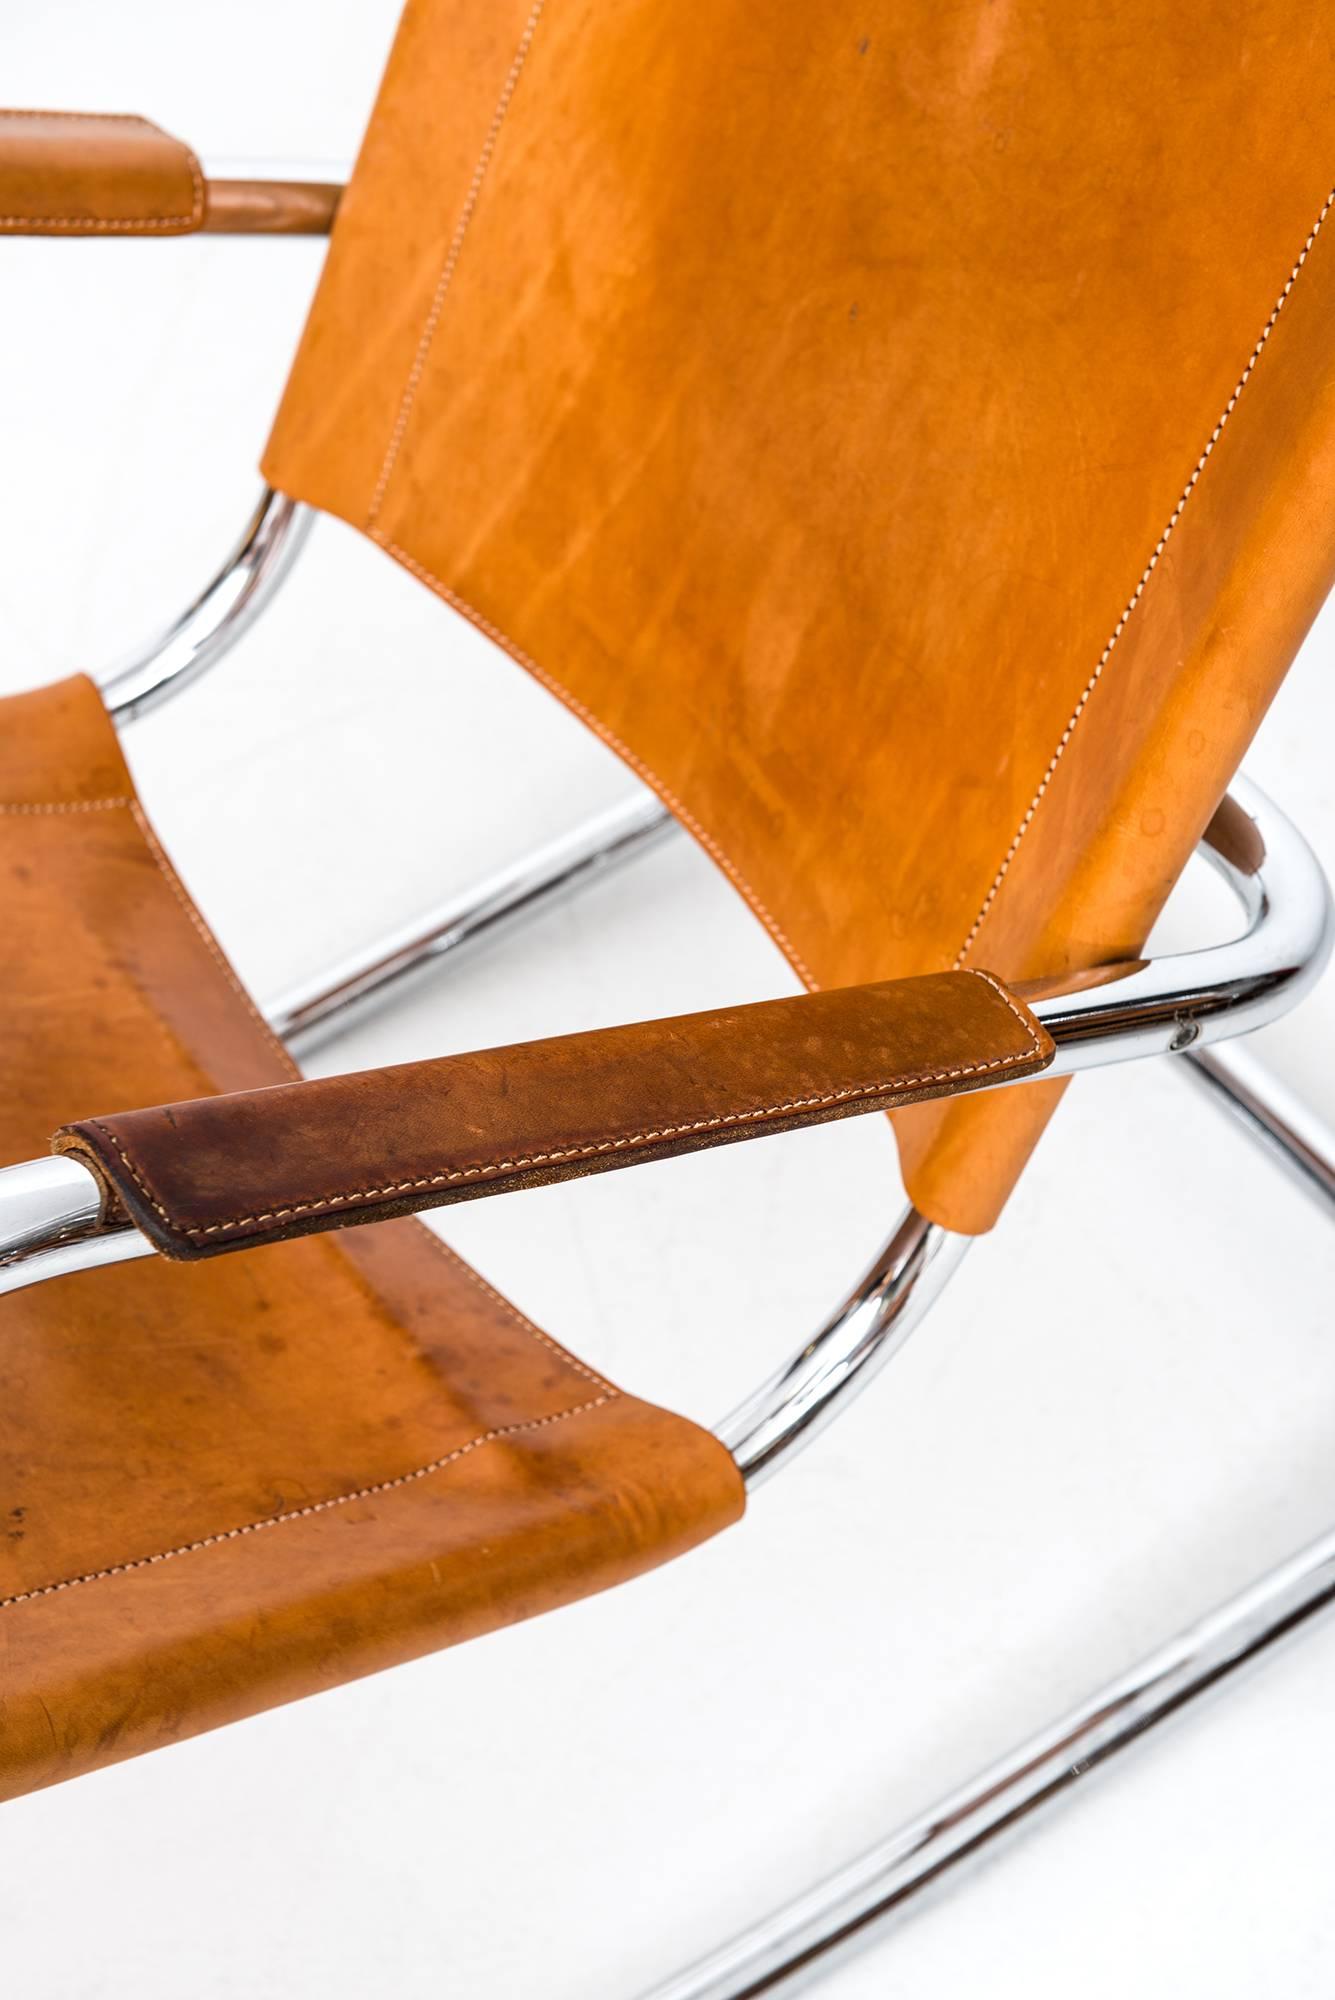 Mid-Century Modern Rocking Chair Produced by Fasem in Italy